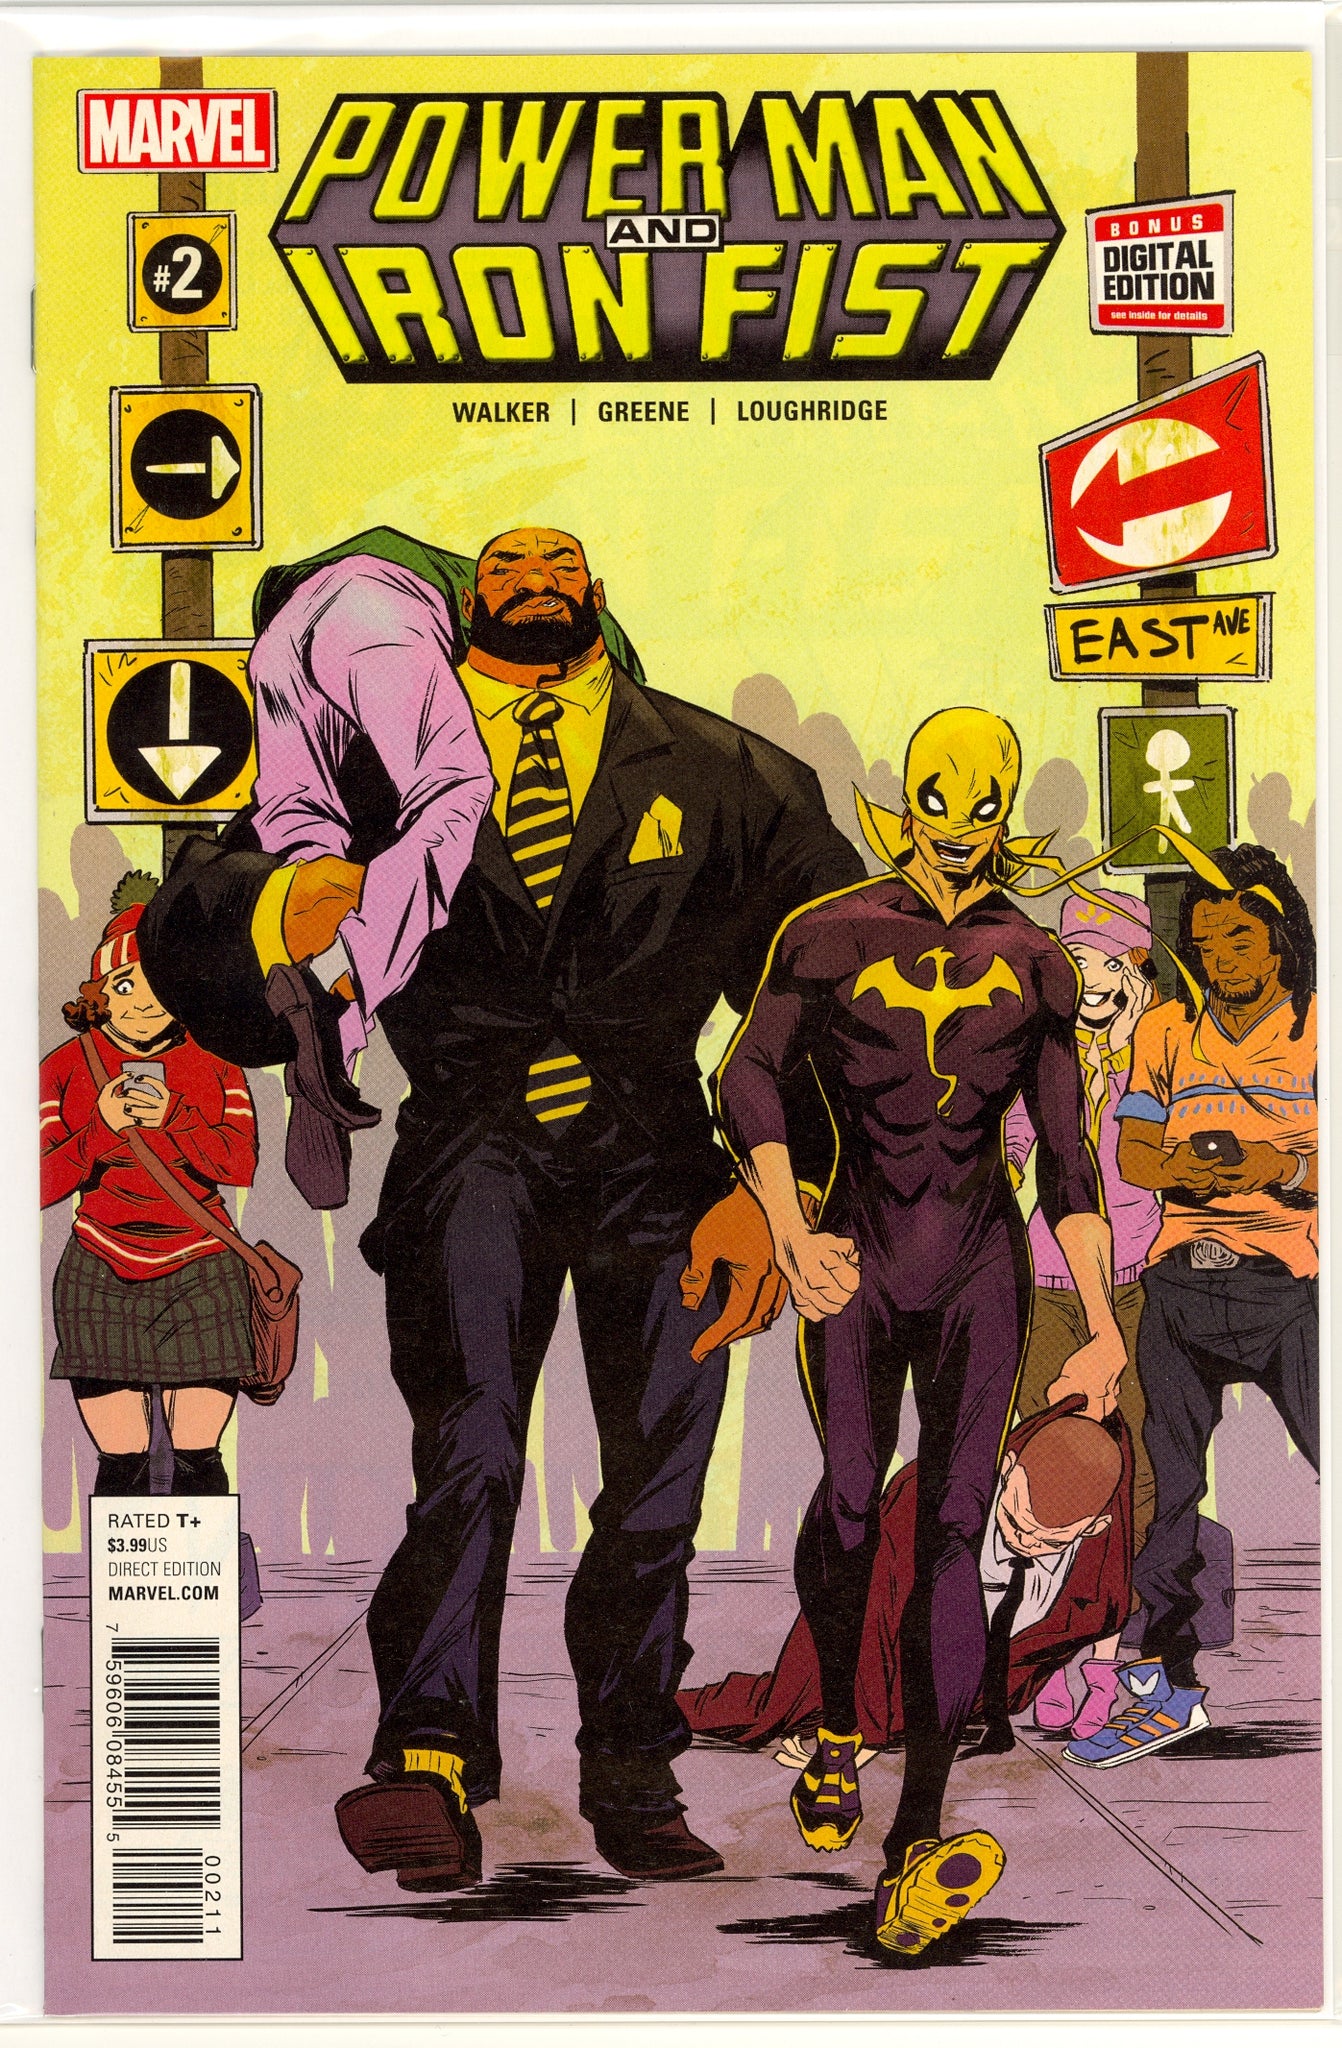 Power Man and Iron Fist #2 (2016)